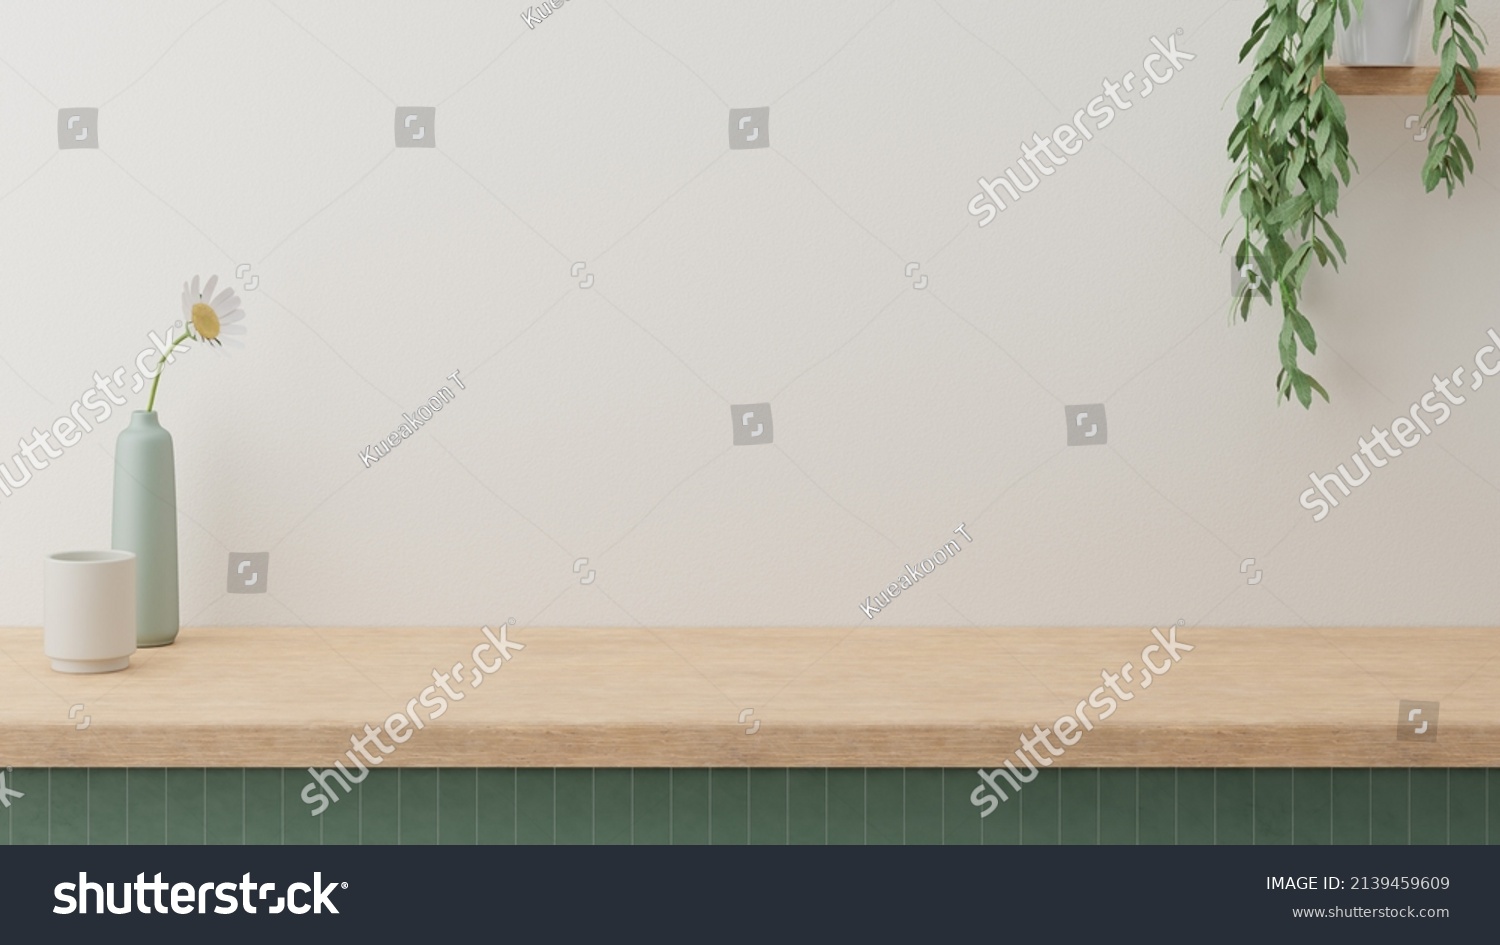 Minimal cozy counter mockup design for product presentation background. Branding in Japan style with wood top green counter and warm white wall with vase plant ceramic mug. Kitchen interior #2139459609